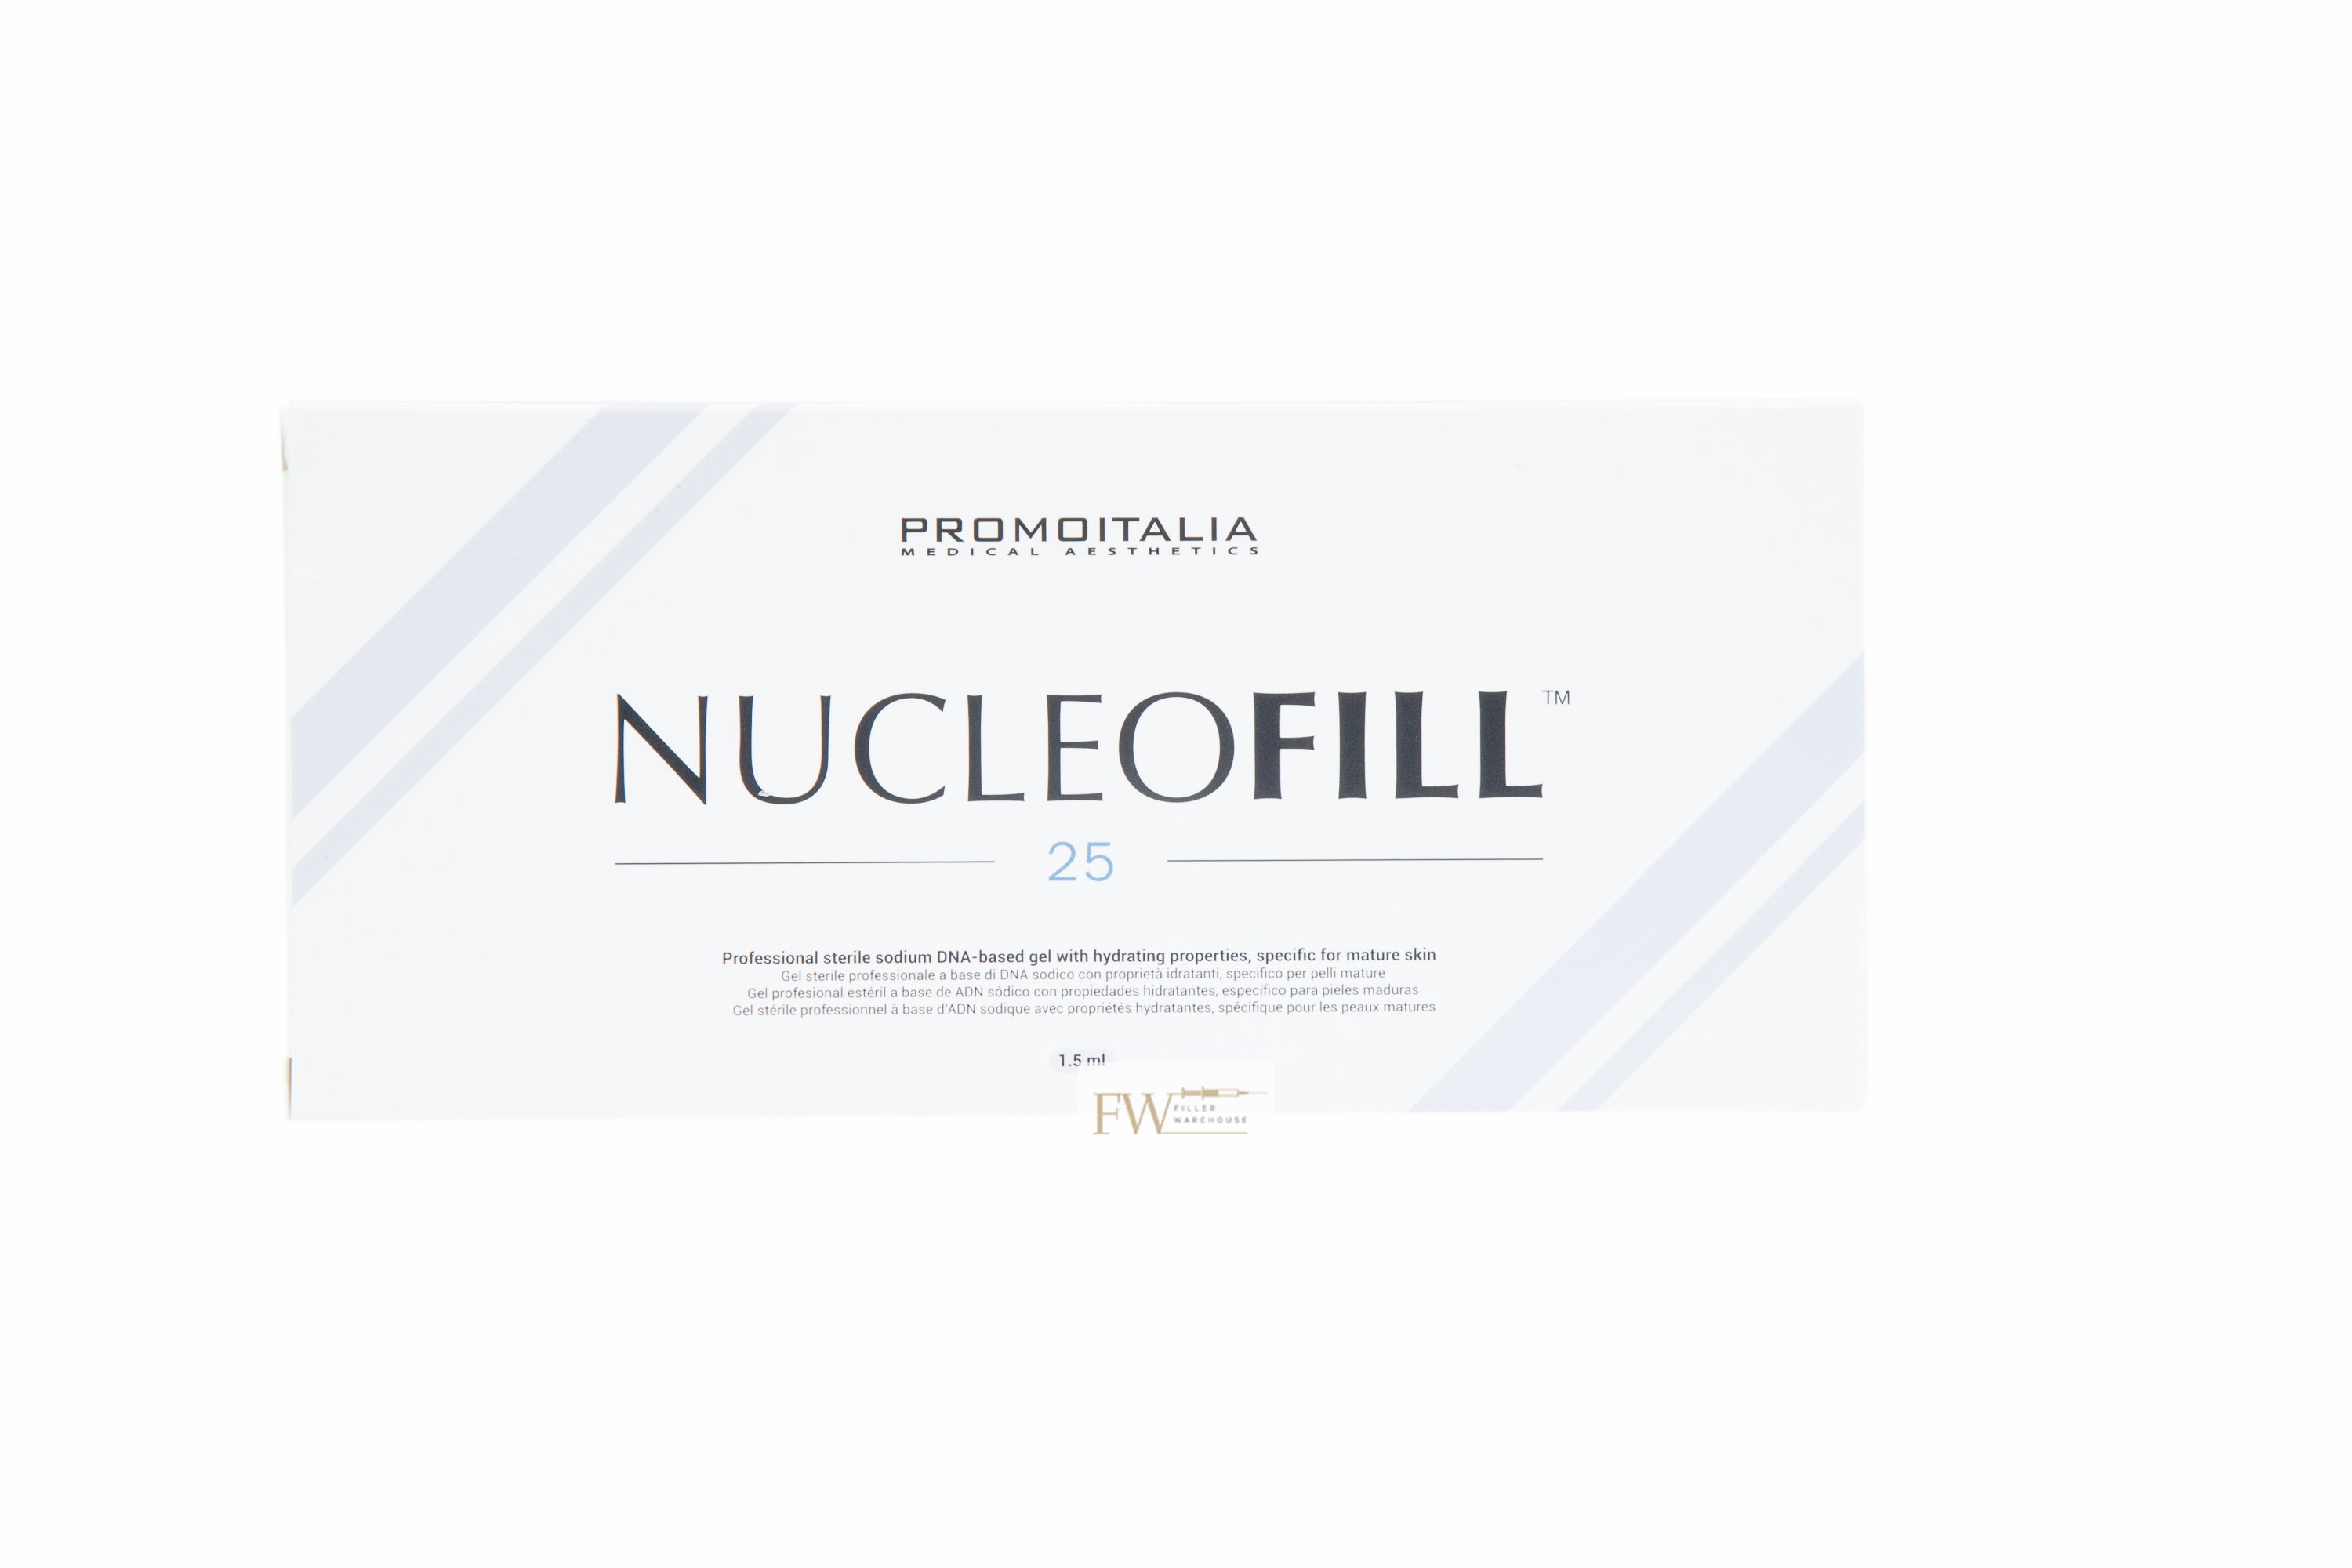 Nucleofill Strong (25) Skin Booster